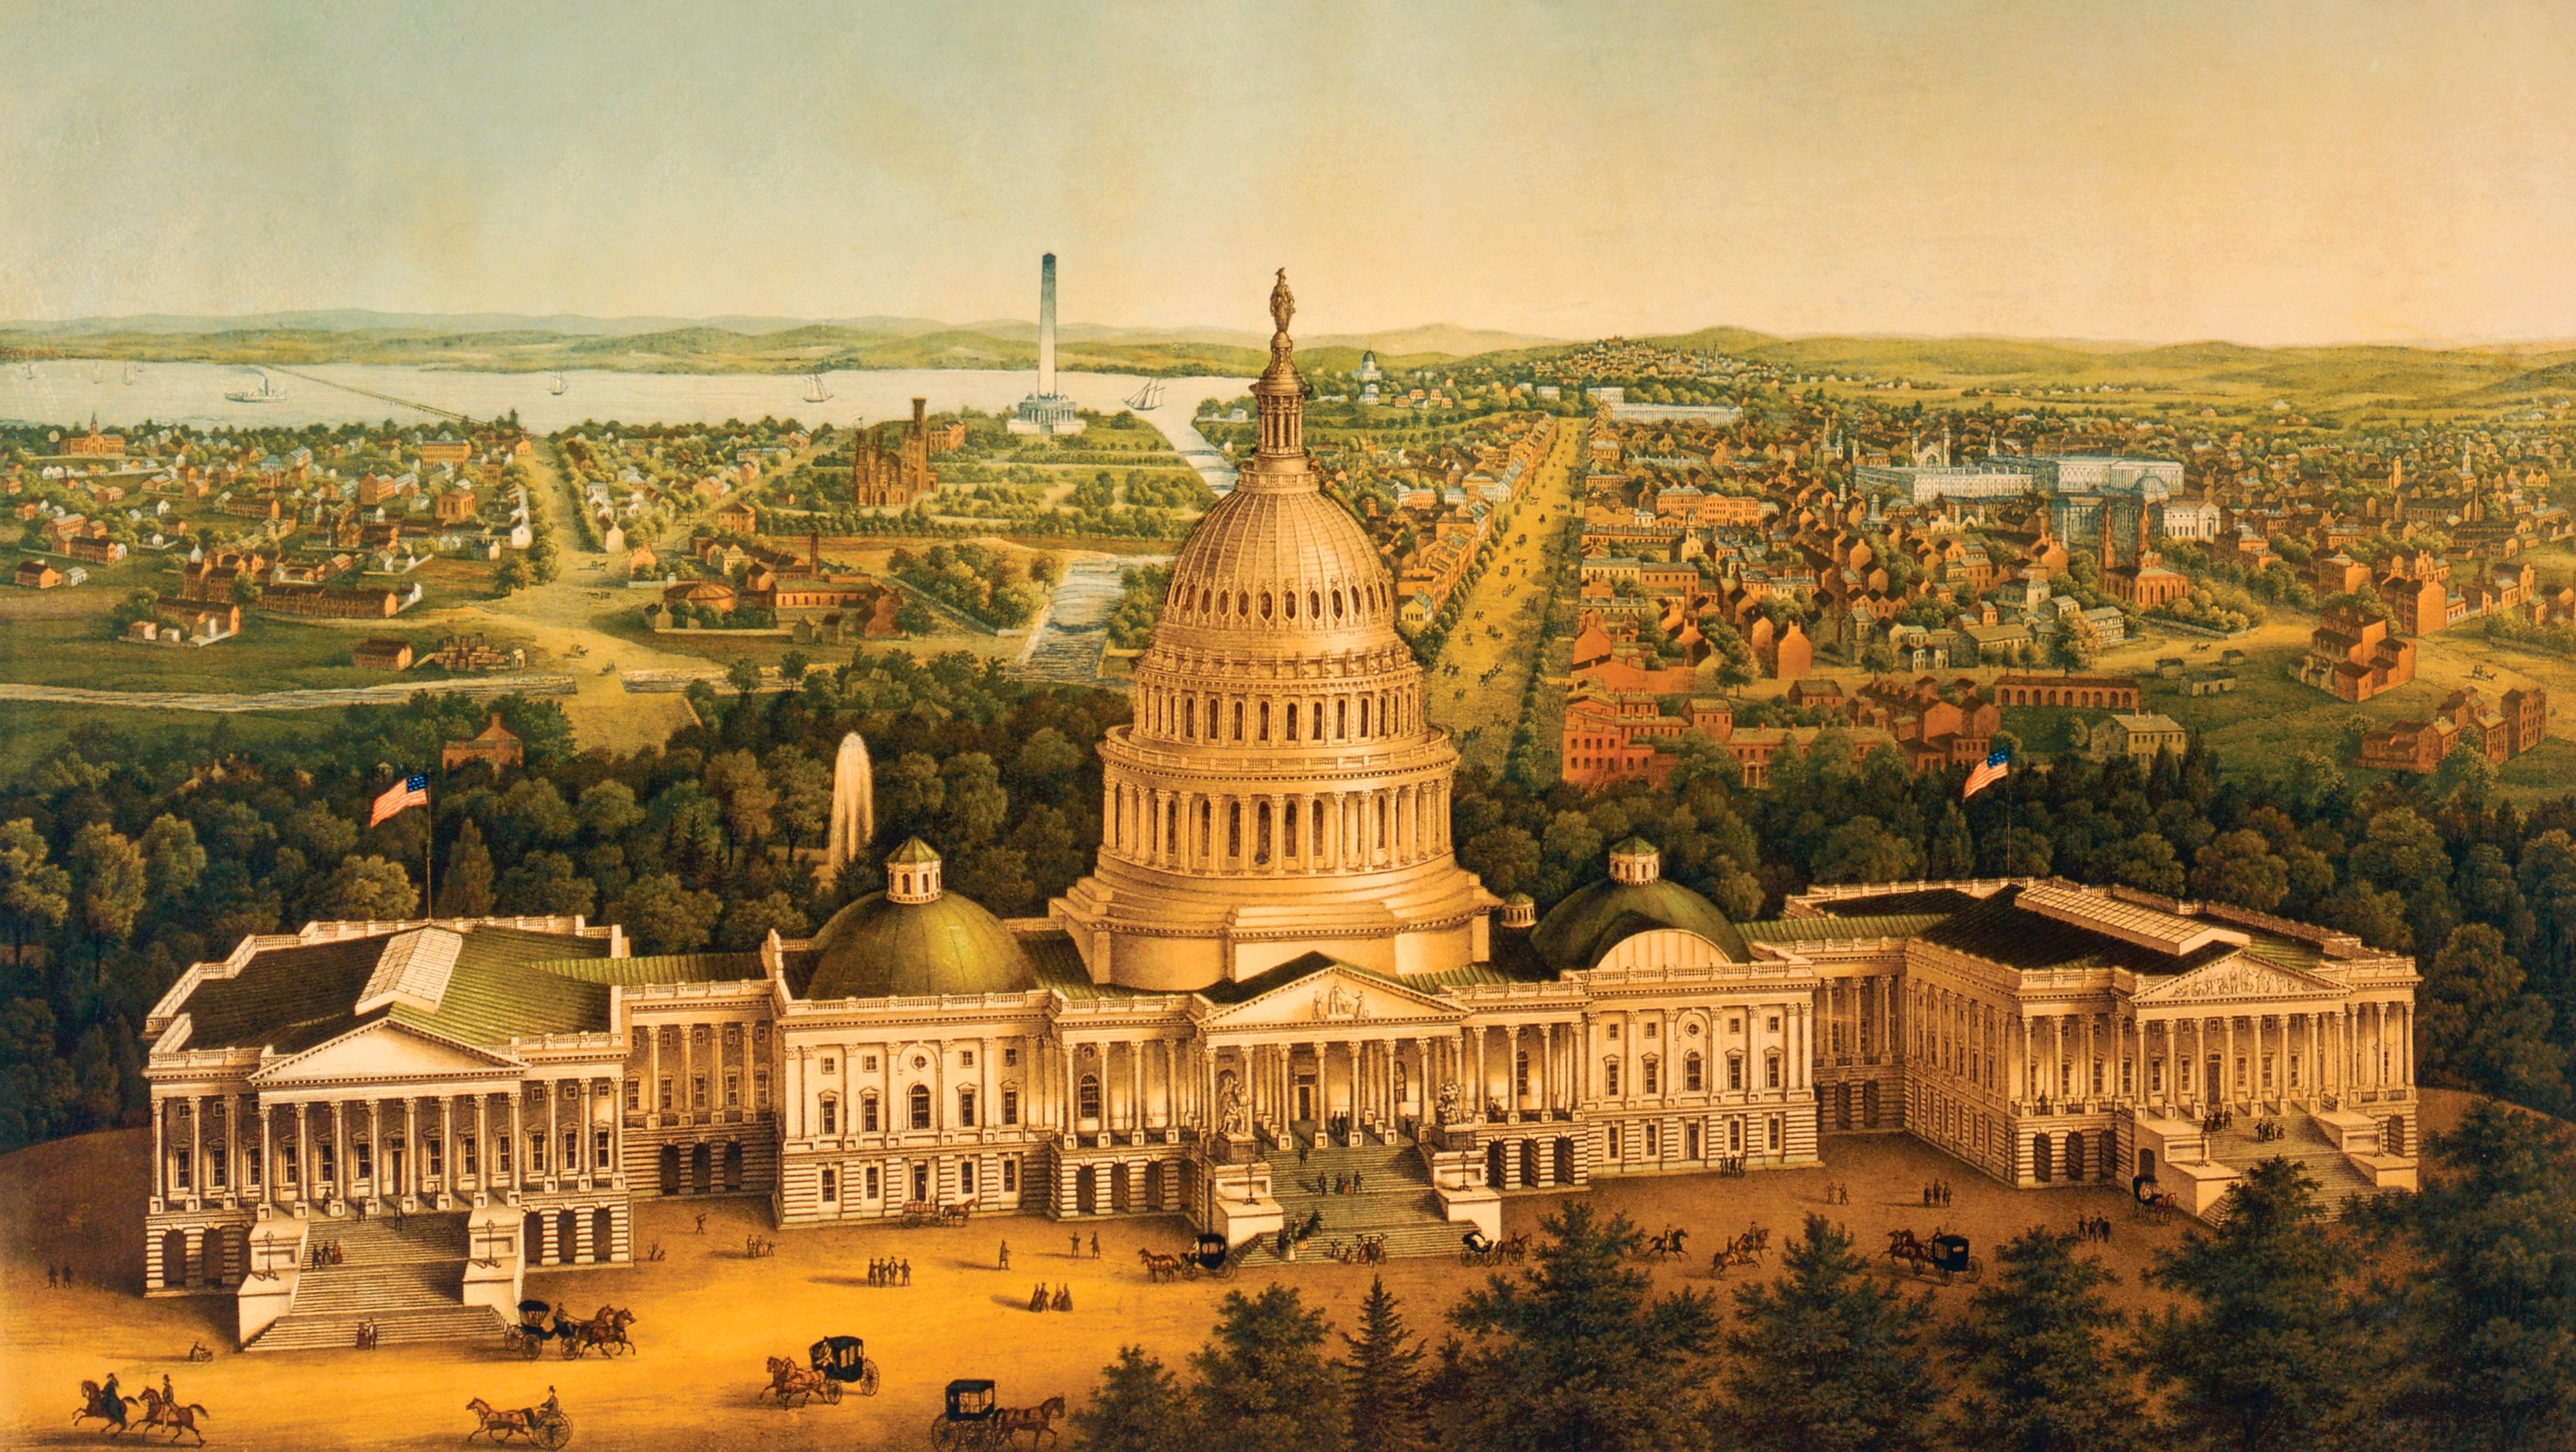 Washington United States of America View of the city circa 1868 with U.S. Capitol foreground From a 19th century print by E. Sache and Company of Baltimore